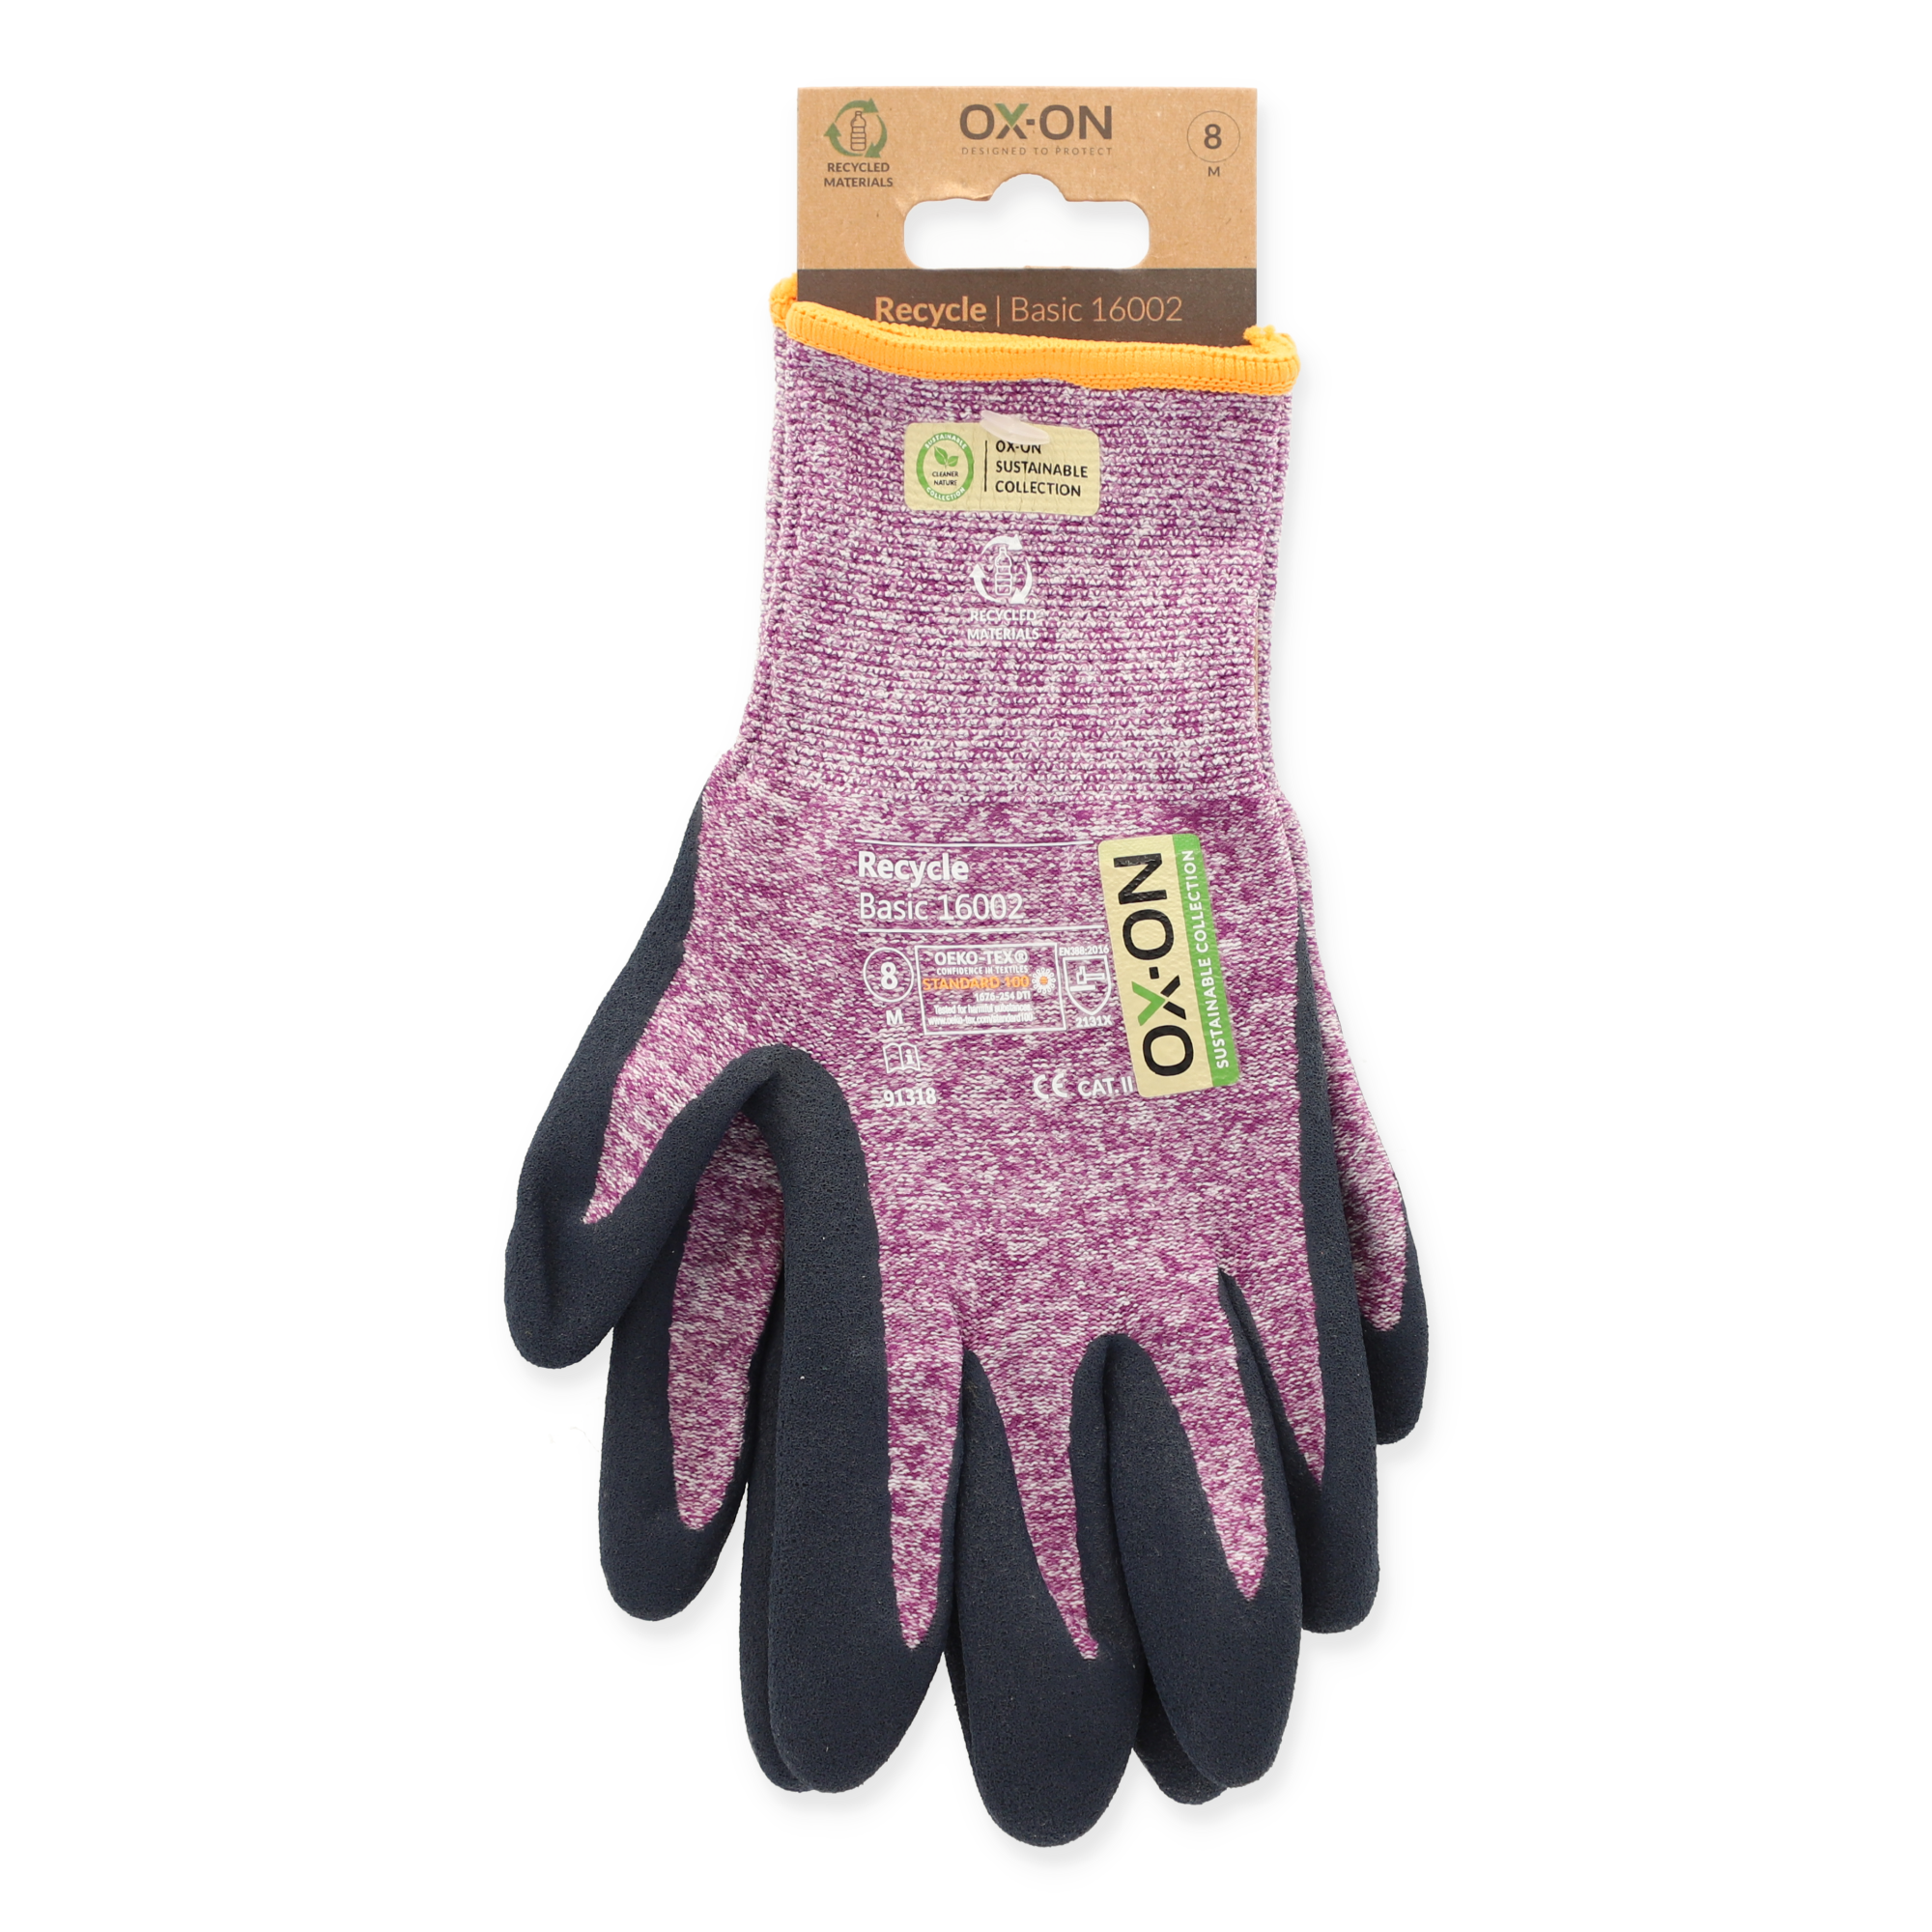 Handschuhe 'Recycle Basic 16002' violett Gr. 8 + product picture